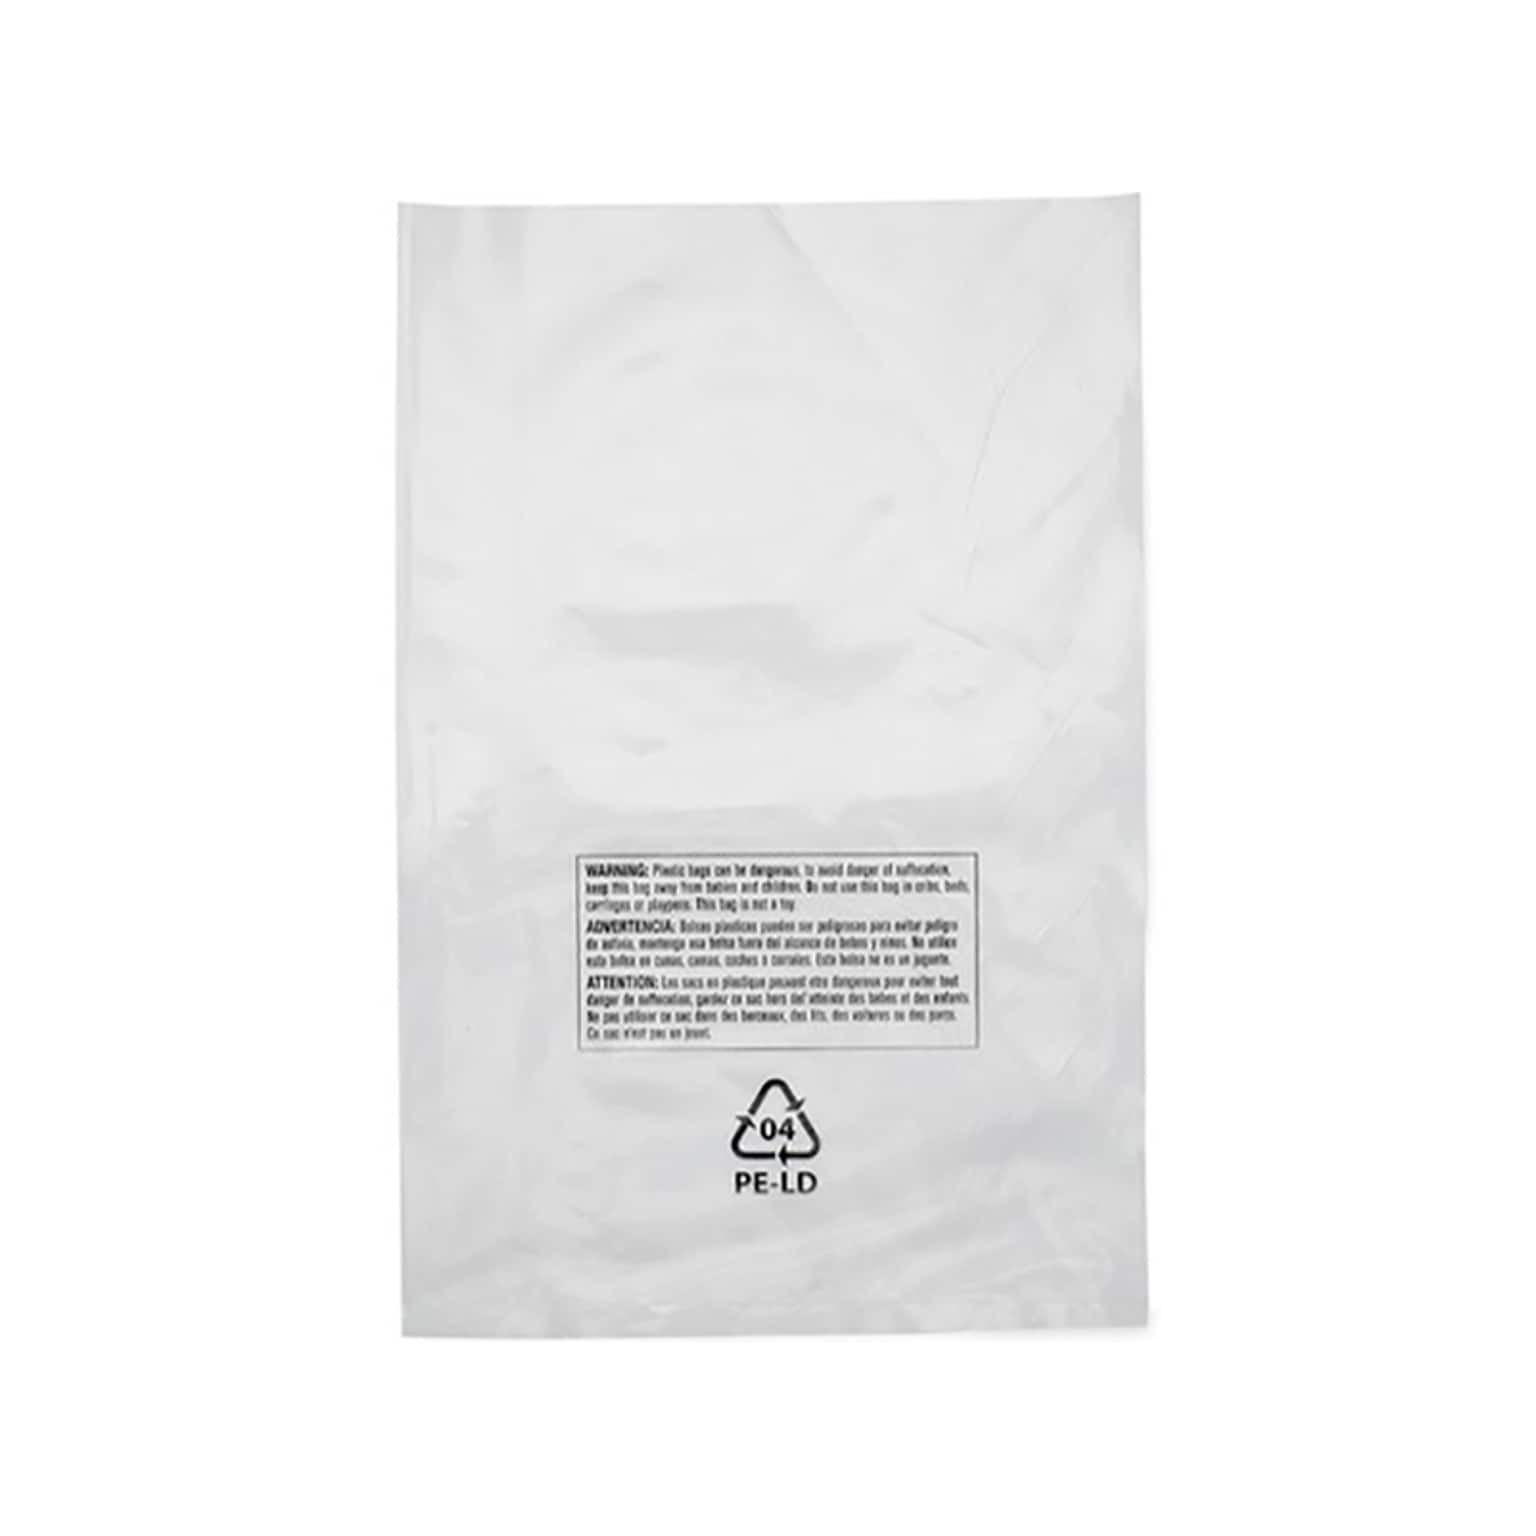 12 x 18 Suffocation Warning Layflat Poly Bags, 1 Mil, Clear, 1000/Carton (16055)